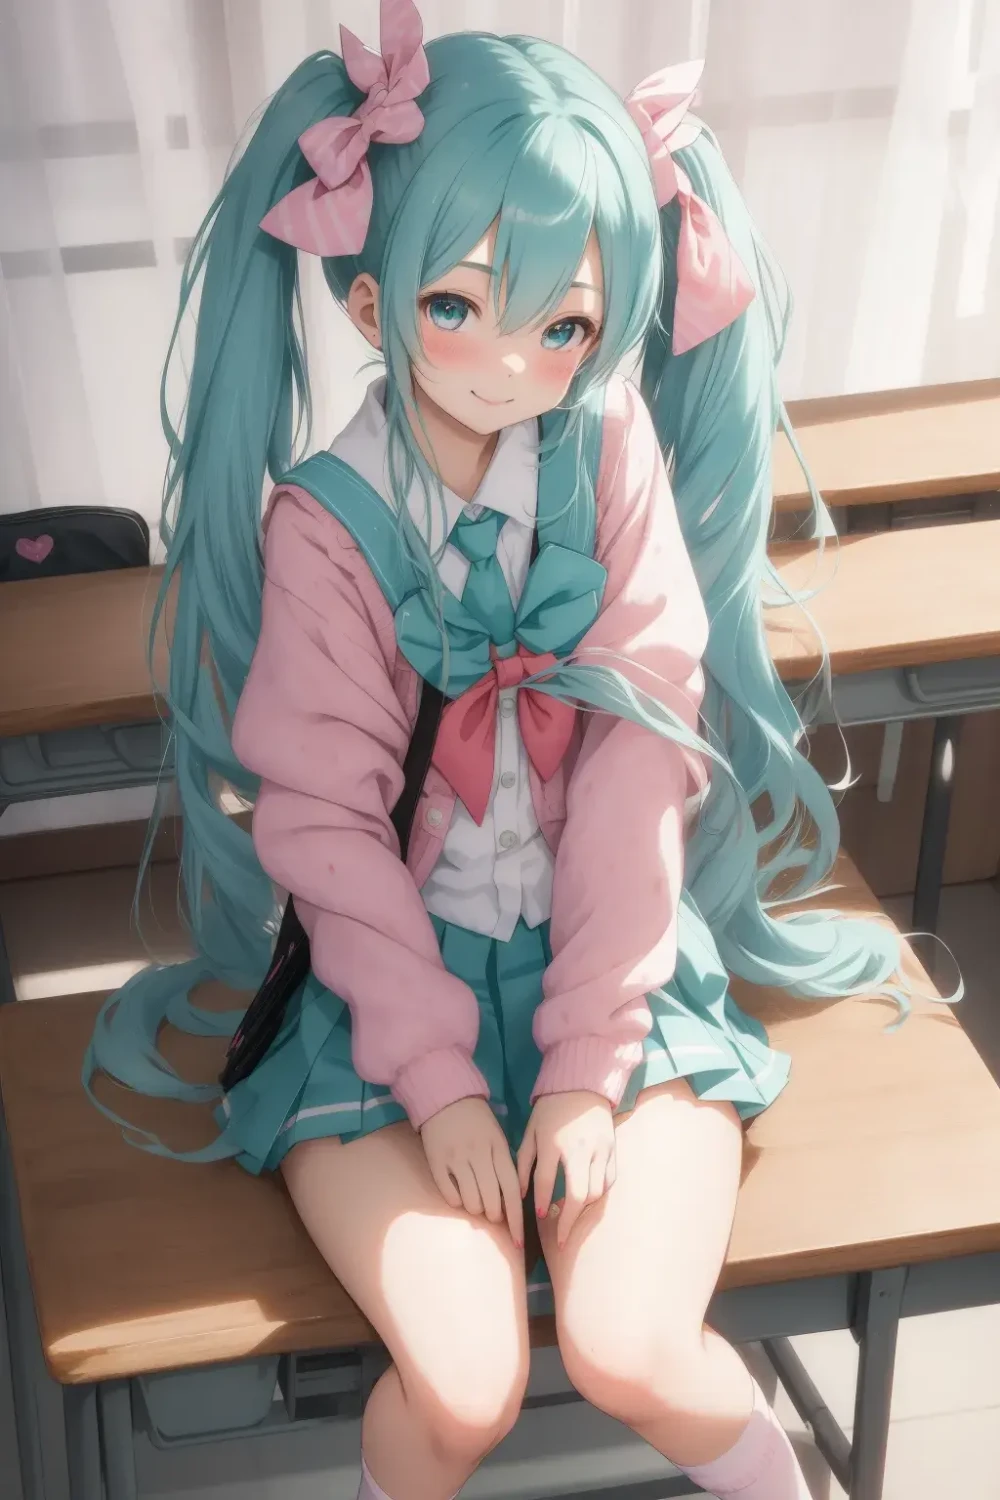 hatsune-miku-anime-style-all-ages-16